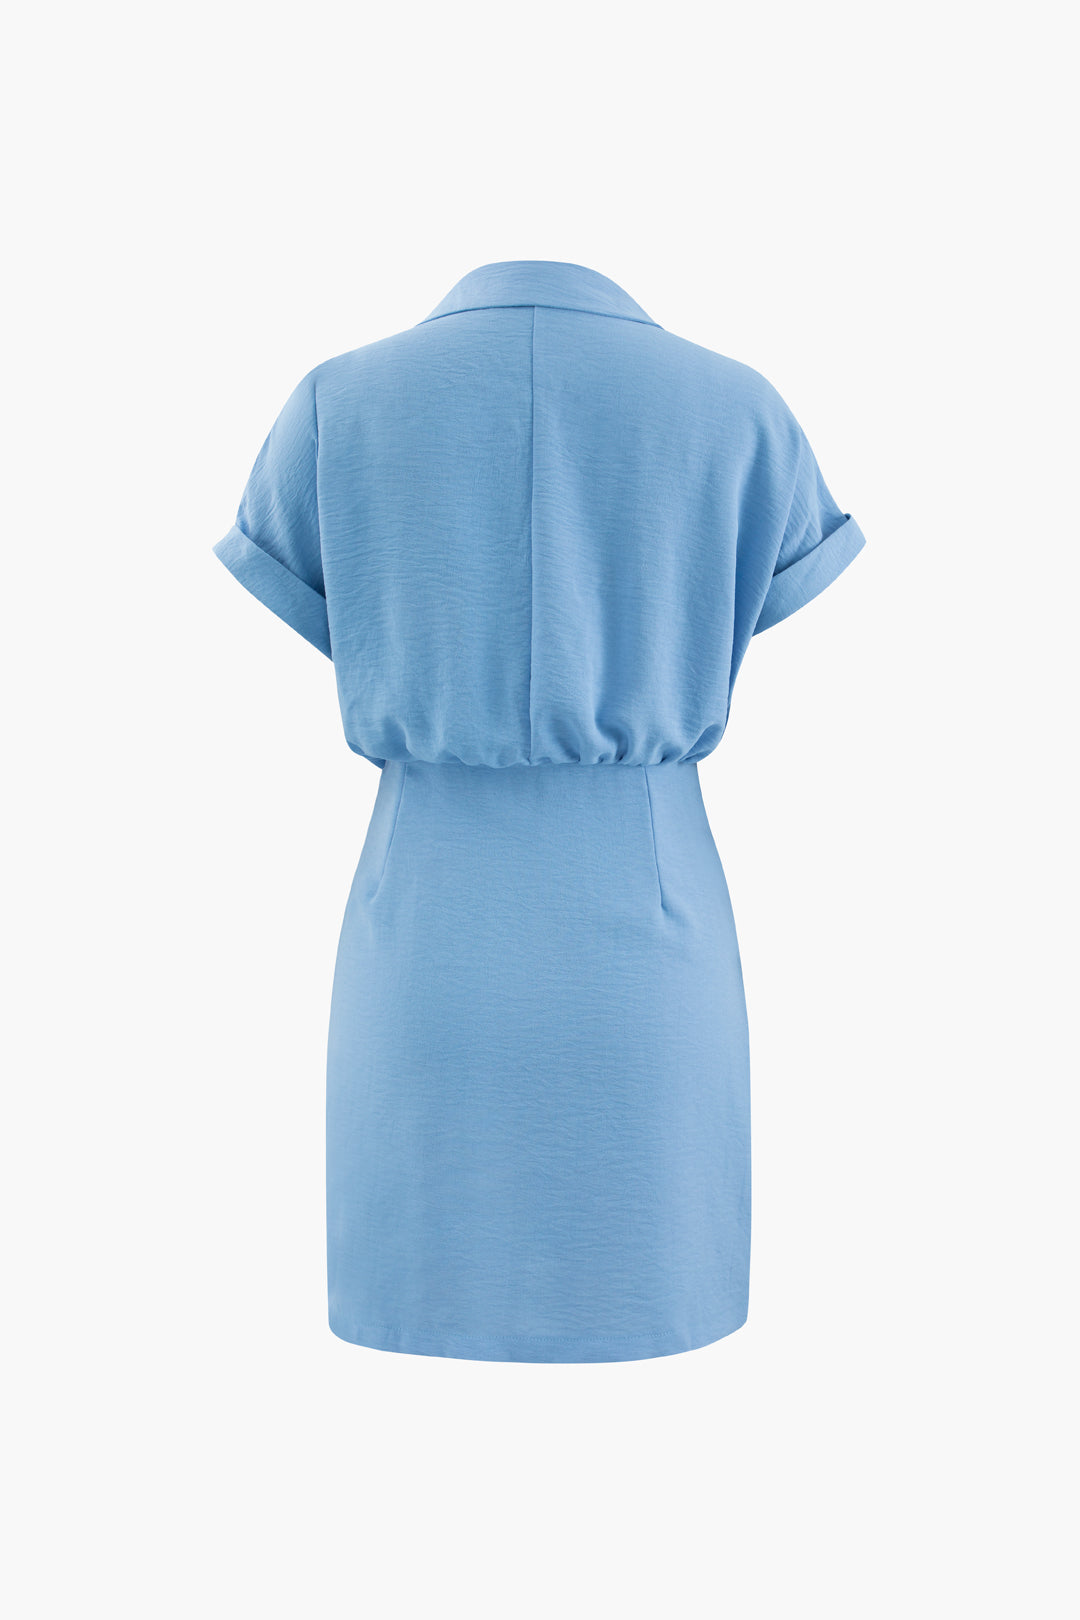  Laughido Tshirt Ruched Sheath Mini Dress Women's Short Sleeve  Casual Fitted Wrap Sundress (Blue, X-Small) : Clothing, Shoes & Jewelry